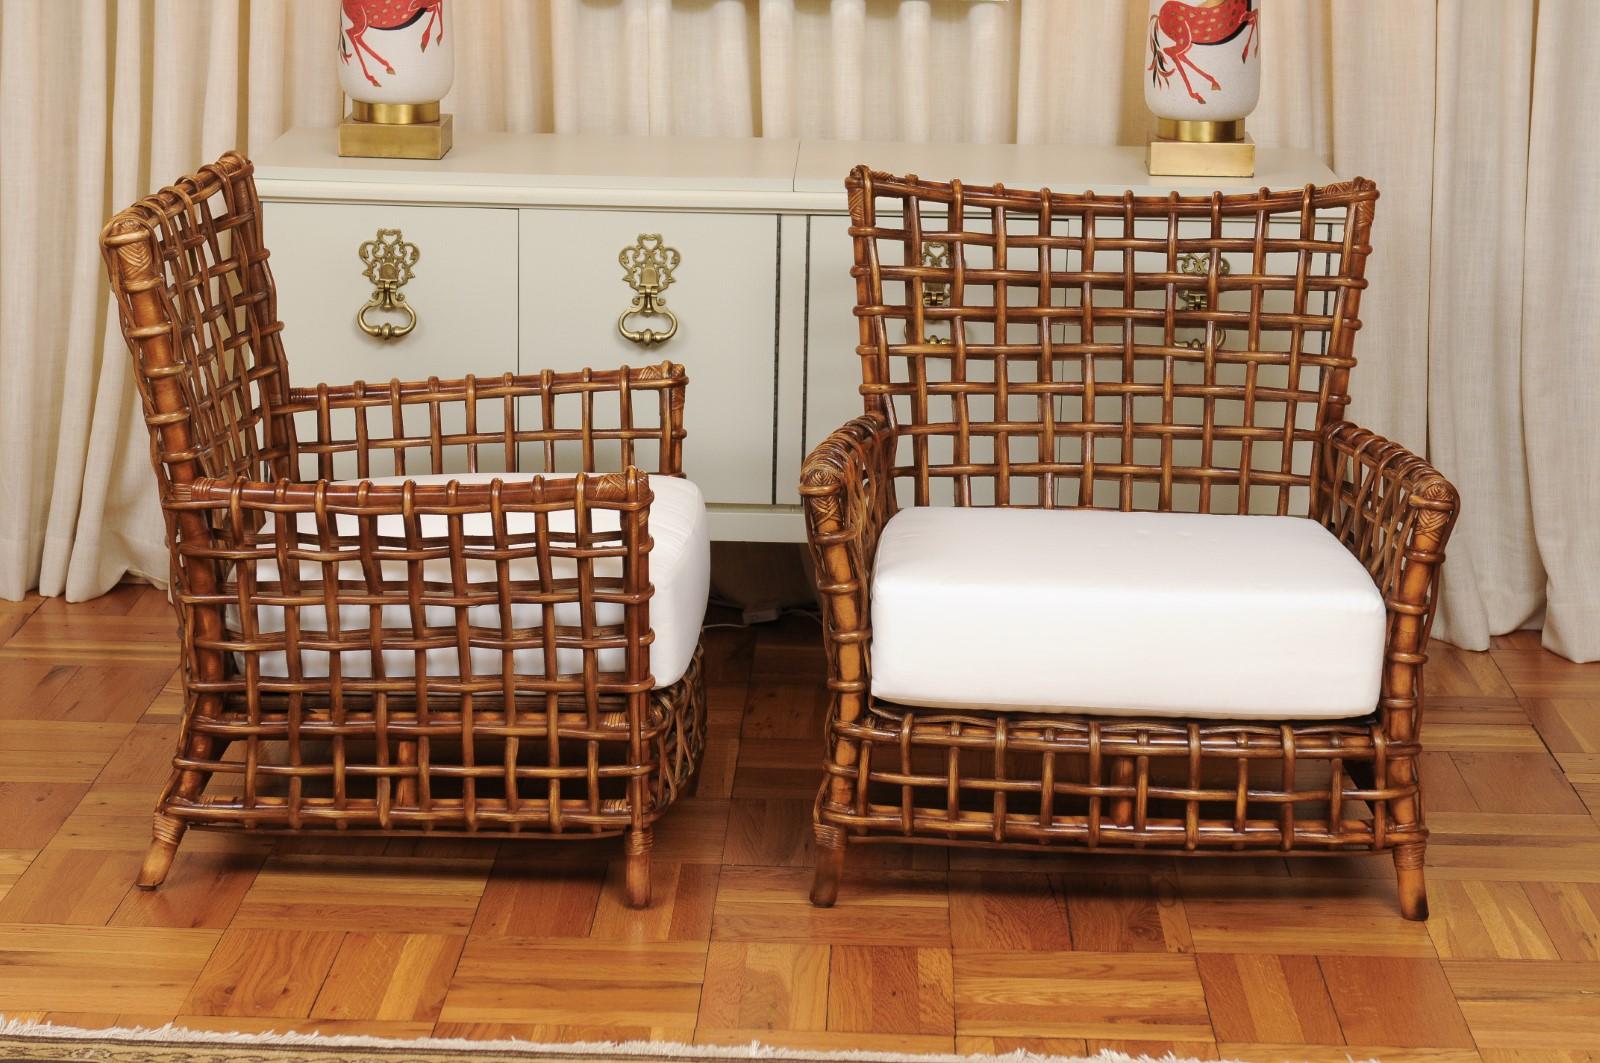 Fabulous Pair of Caramel Rattan and Cane Club Chairs - 2 Pair Available In Excellent Condition For Sale In Atlanta, GA